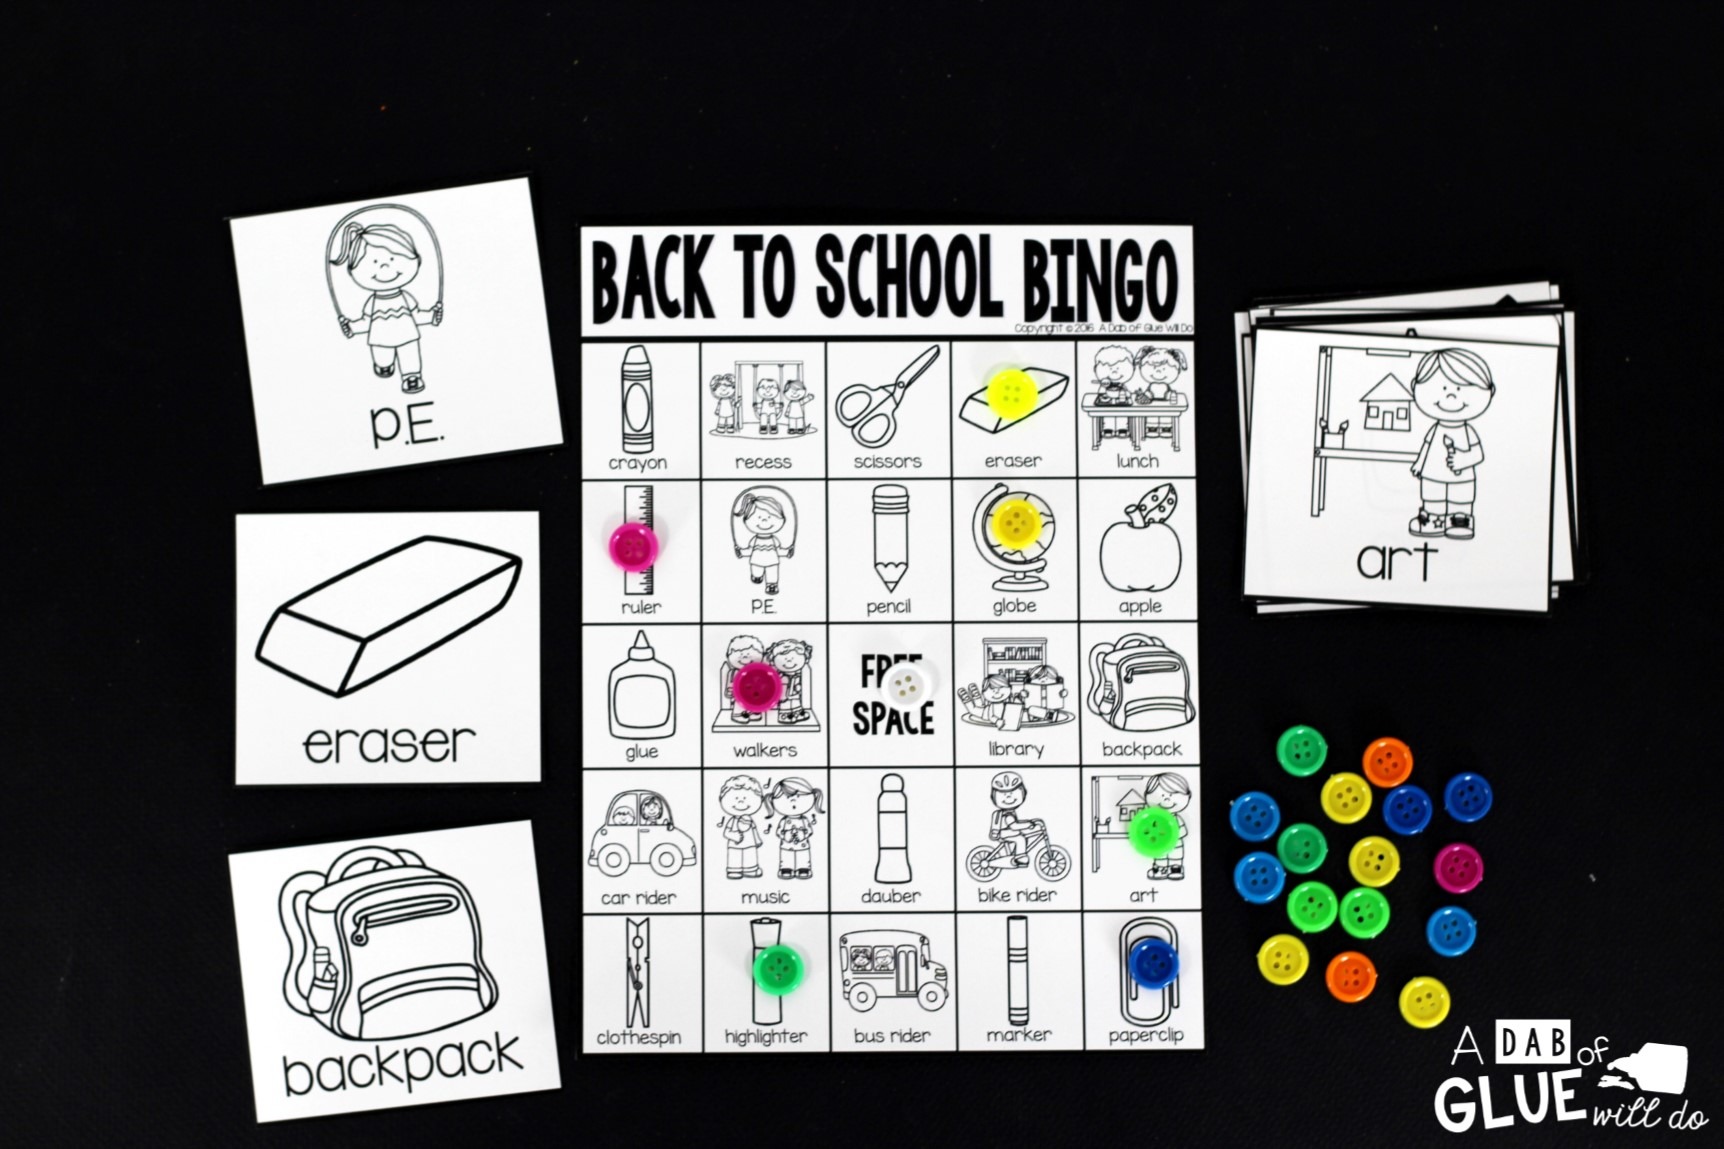 Play Bingo with your elementary age students for a fun back to school themed game! Perfect for large groups in your classroom or small review groups. Add this to your beginning of the year lesson plans with 30 unique Back to School Bingo boards! Teaching cards are also included in this fun game for young children! Black and white options available to save your color ink. 